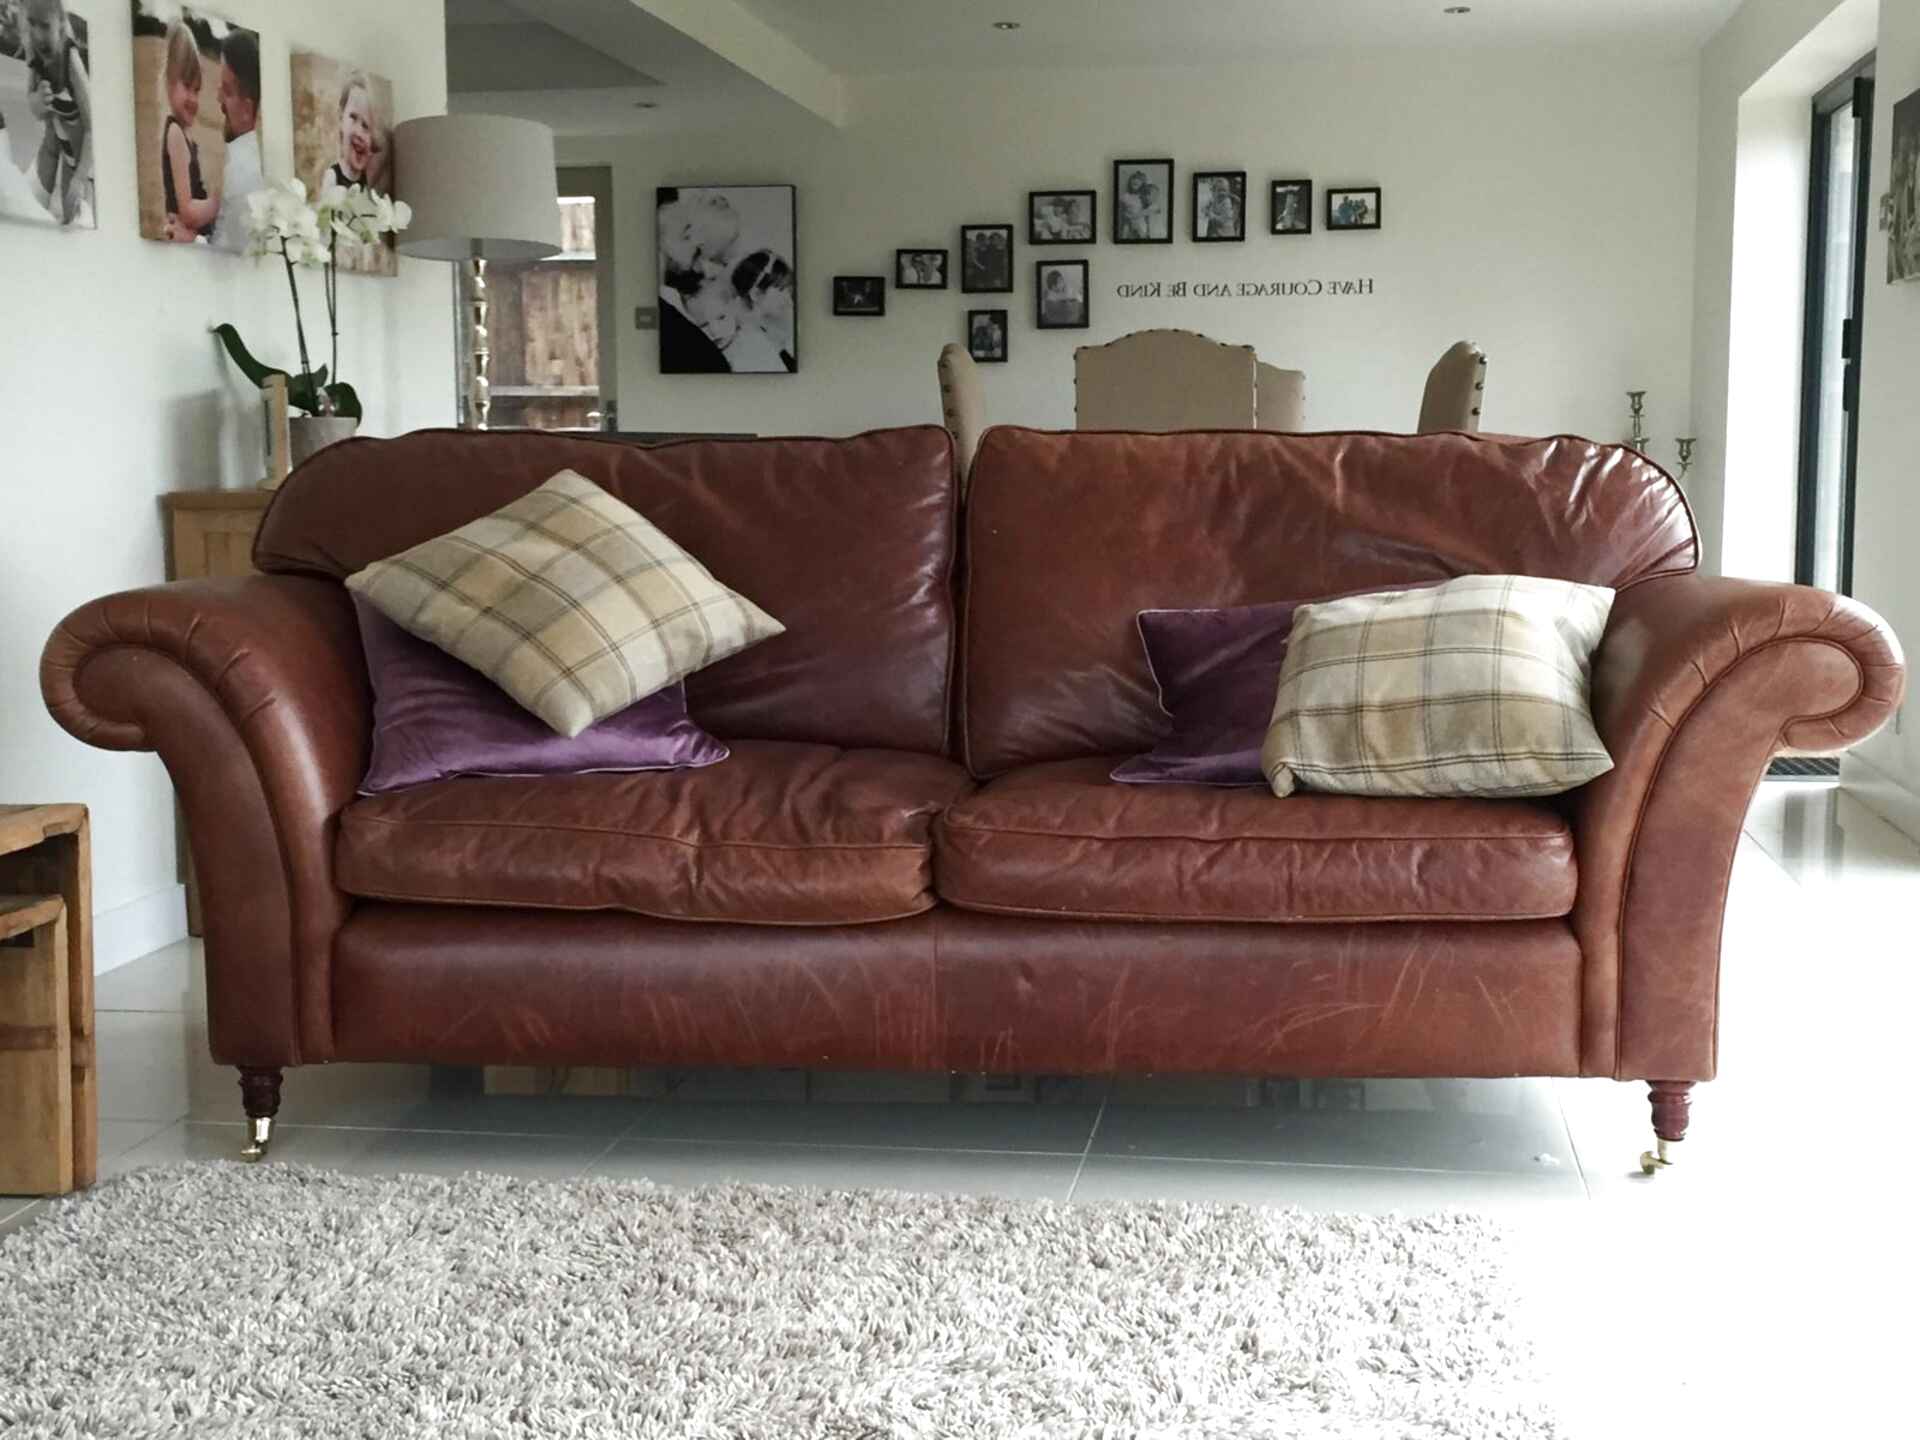 Laura Ashley Leather Sofa For Sale In Uk View 58 Ads